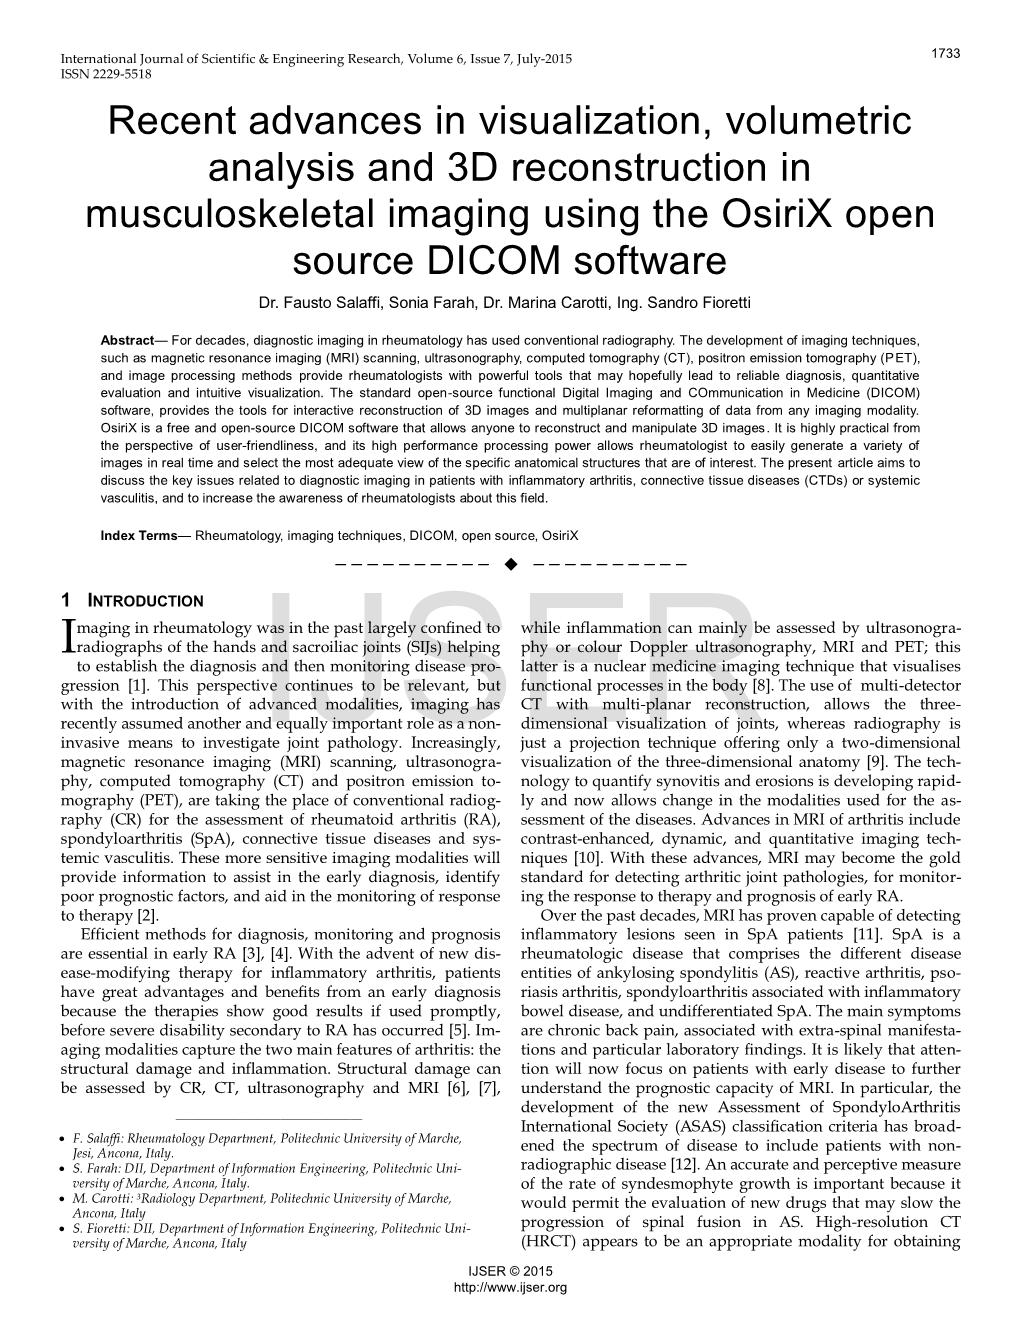 Recent Advances in Visualization, Volumetric Analysis and 3D Reconstruction in Musculoskeletal Imaging Using the Osirix Open Source DICOM Software Dr